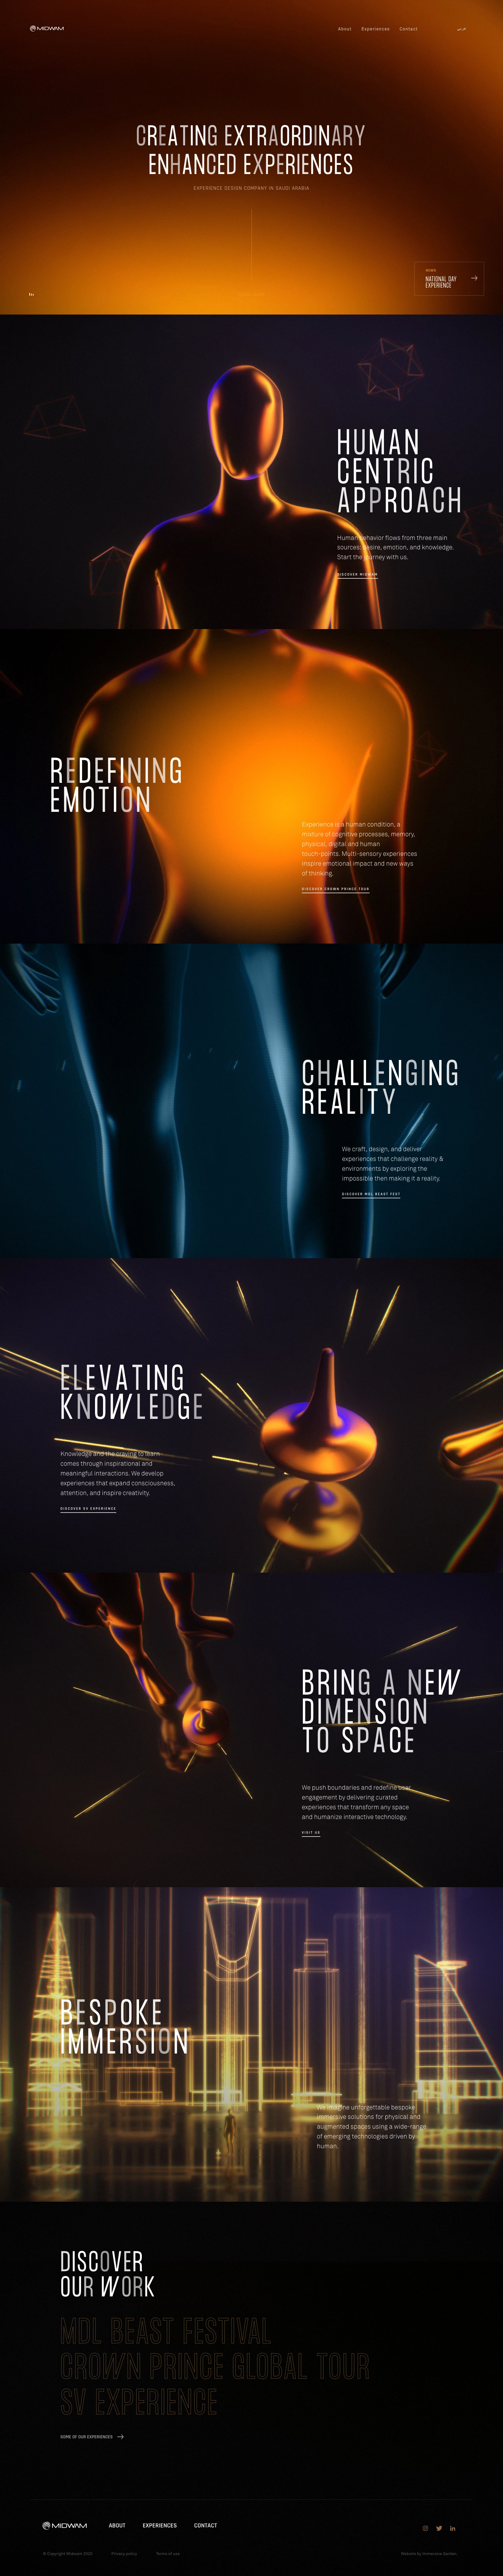 MIDWAM Landing Page Example: Experience is a human condition, a mixture of cognitive processes, memory, physical, digital and human touch-points. Multi-sensory experiences inspire emotional impact and new ways of thinking.